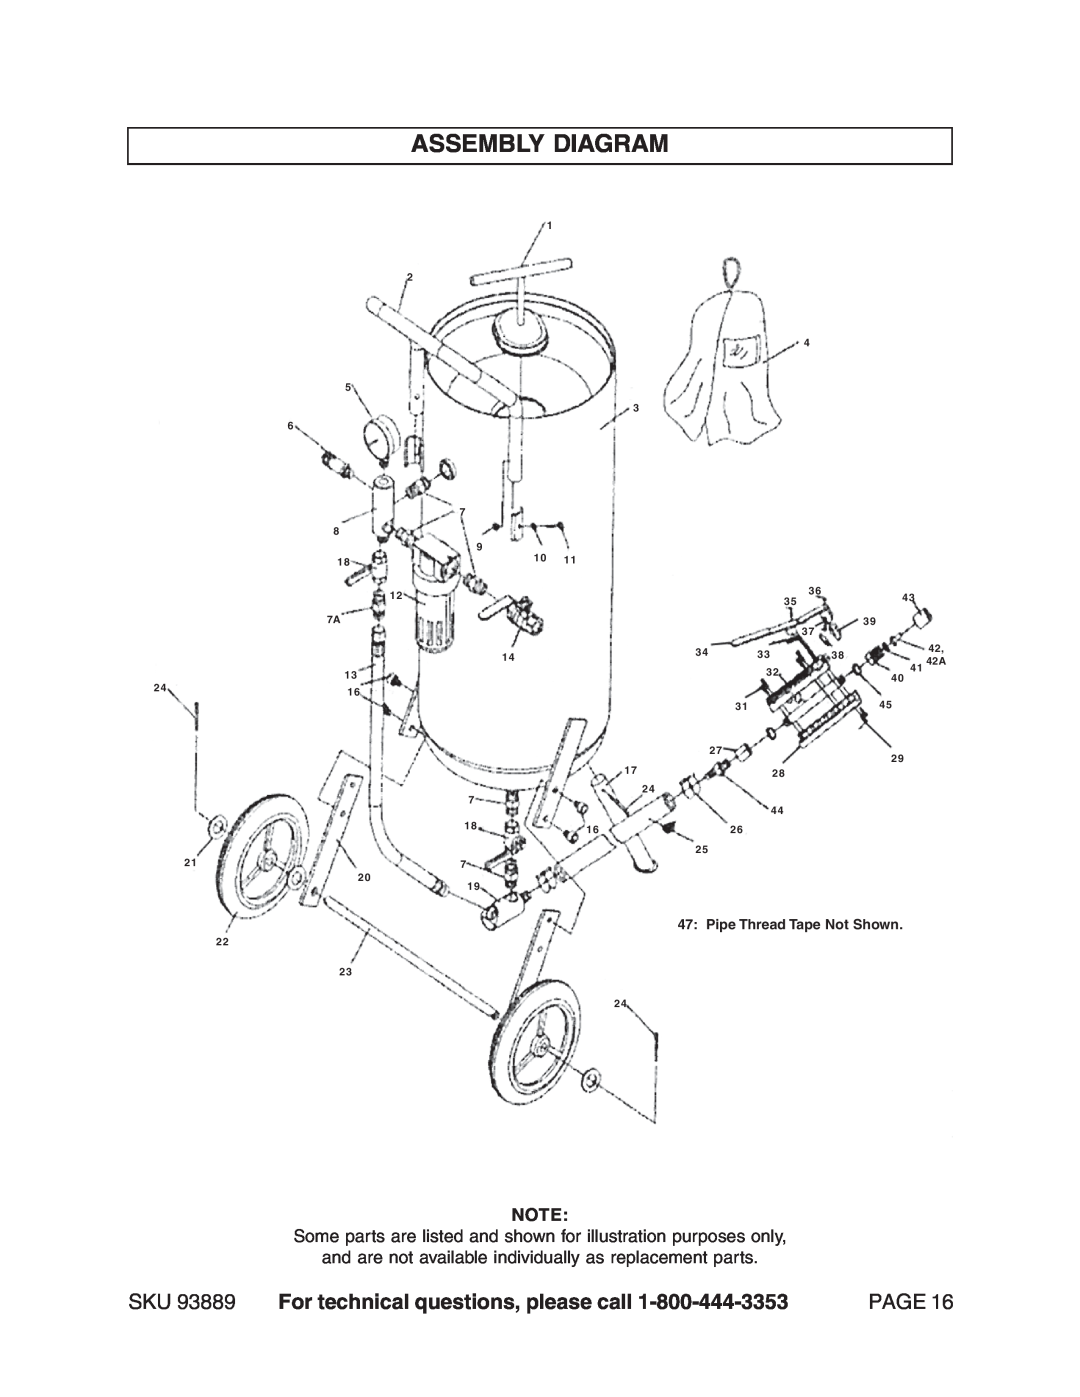 Harbor Freight Tools Assembly Diagram, SKU 93889 For technical questions, please call, Page, Pipe Thread Tape Not Shown 